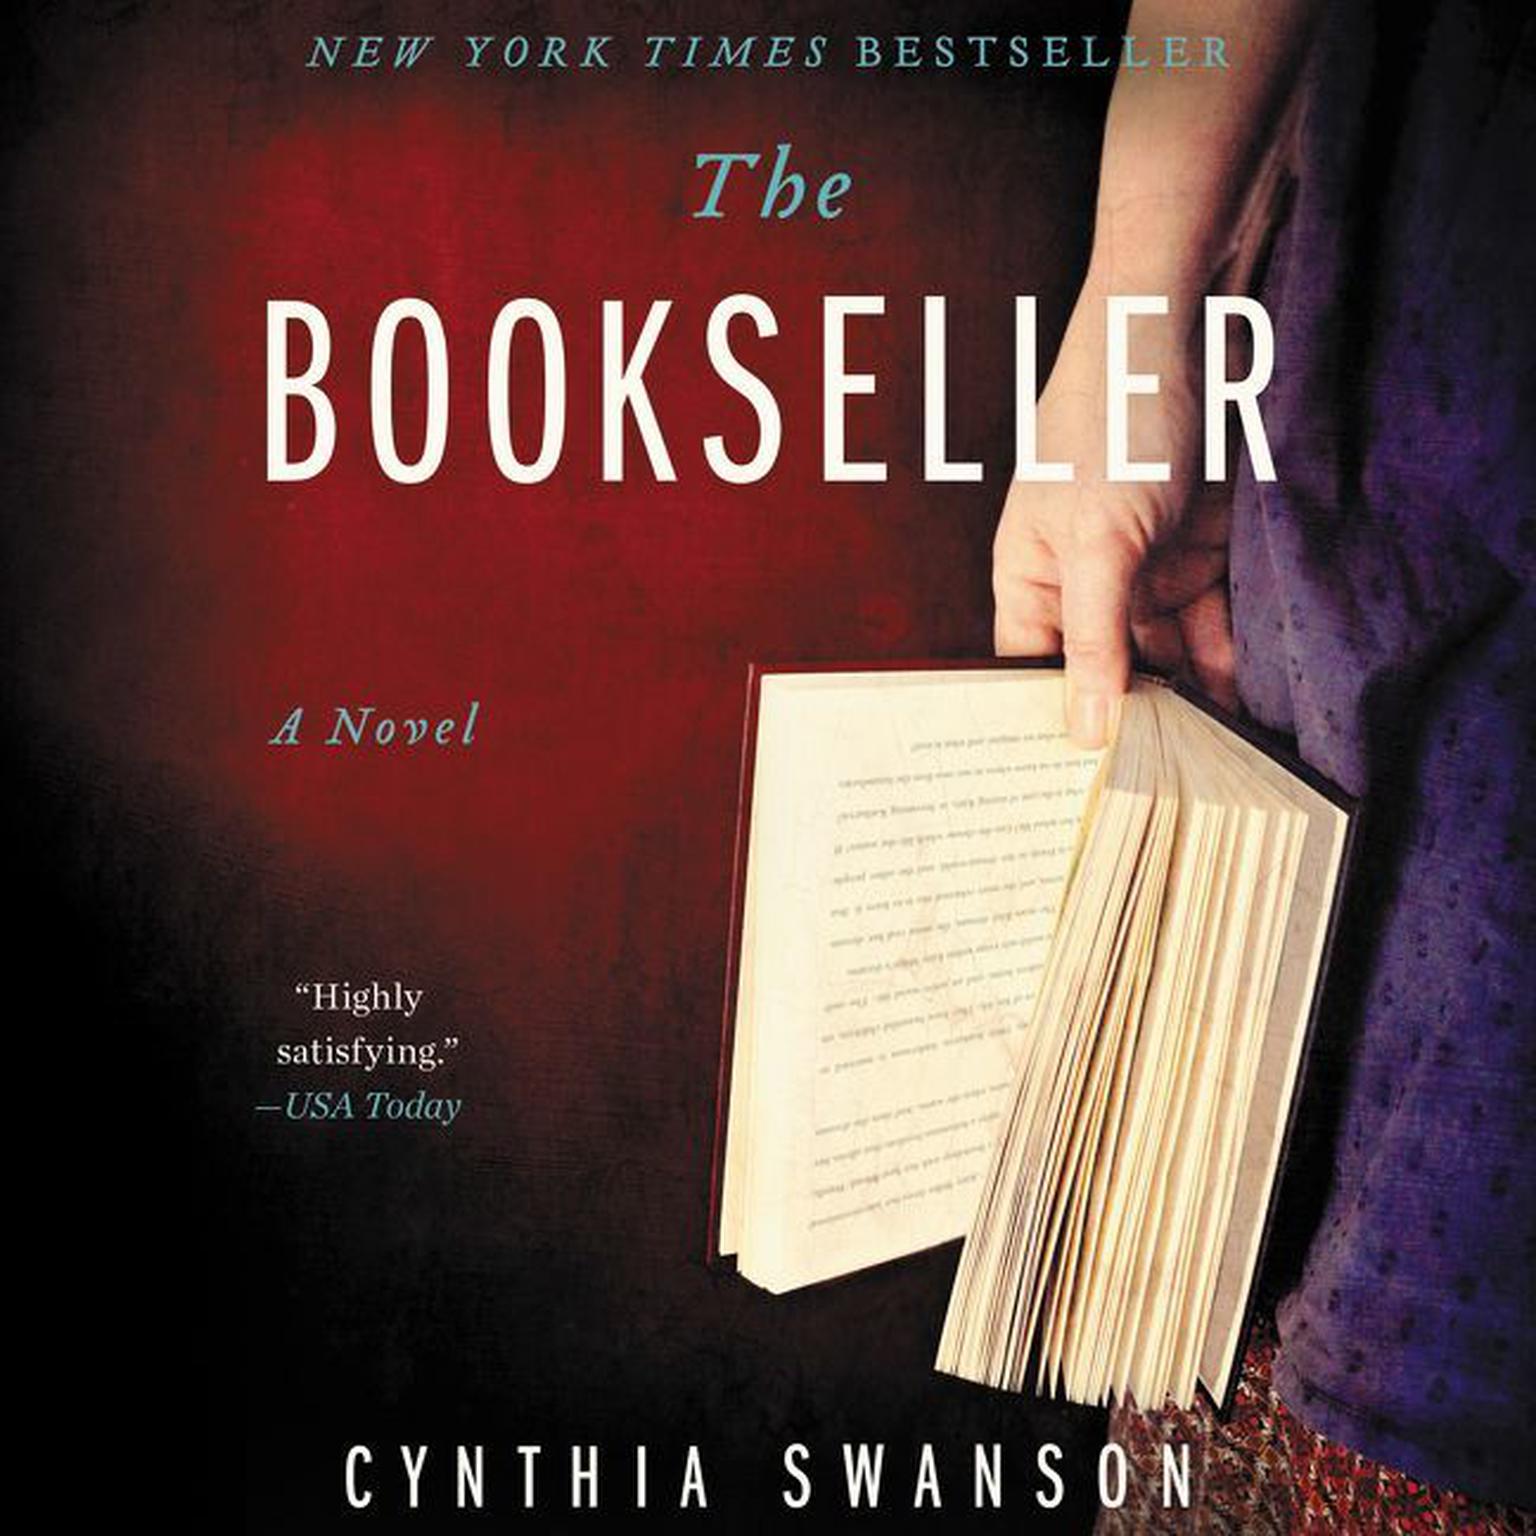 The Bookseller: A Novel Audiobook, by Cynthia Swanson